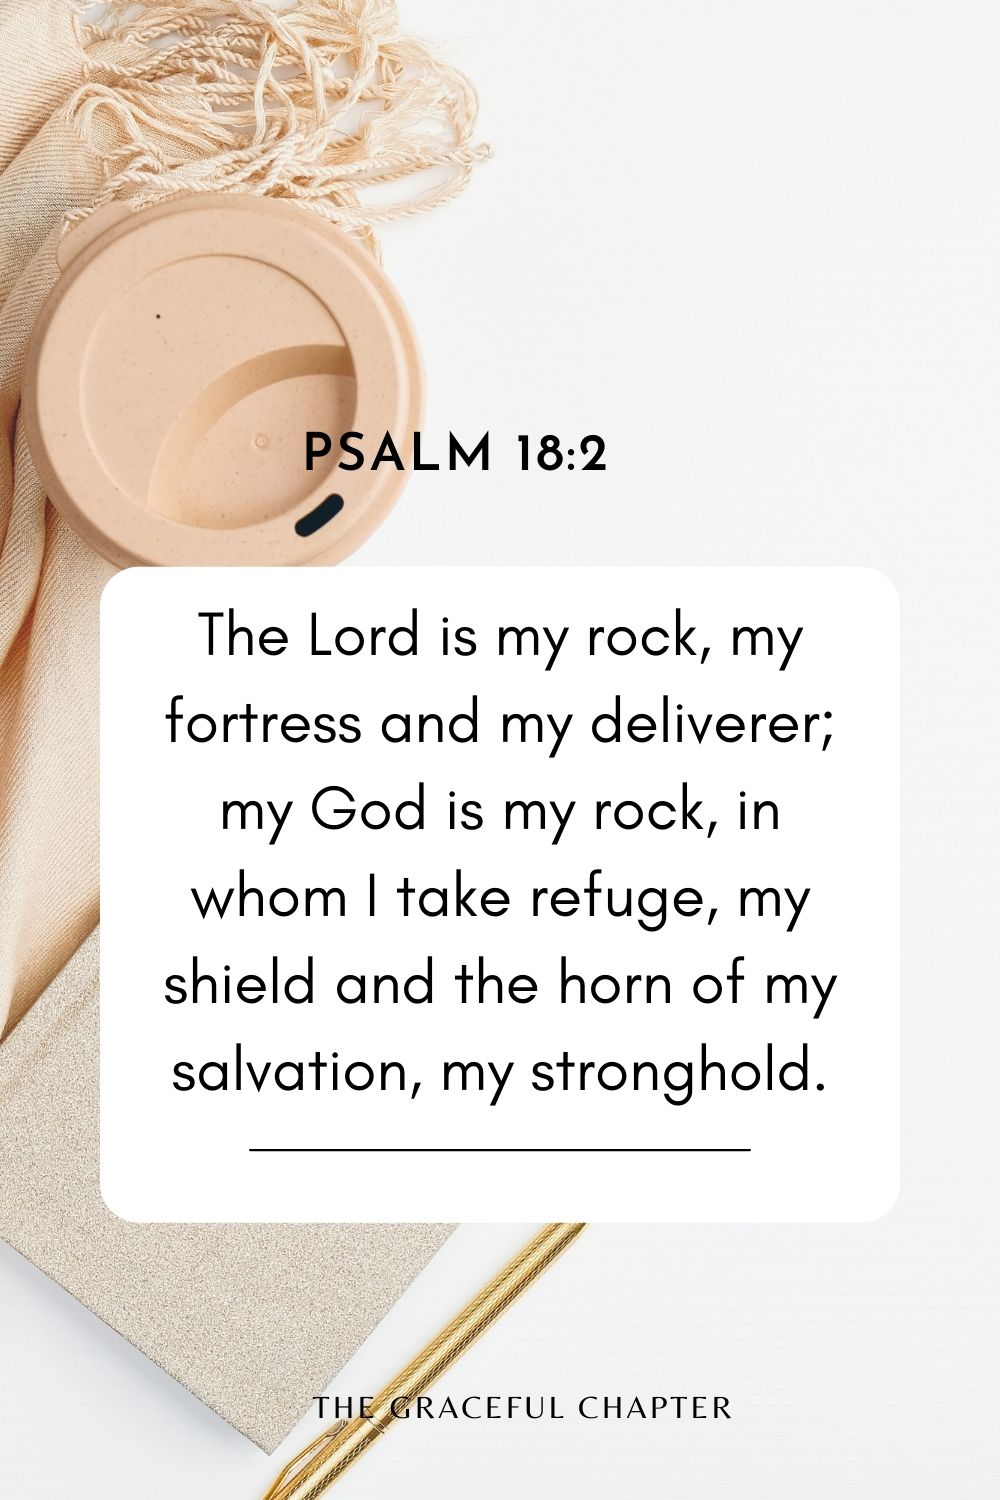 The Lord is my rock, my fortress and my deliverer; my God is my rock, in whom I take refuge, my shield and the horn of my salvation, my stronghold. Psalm 18:2